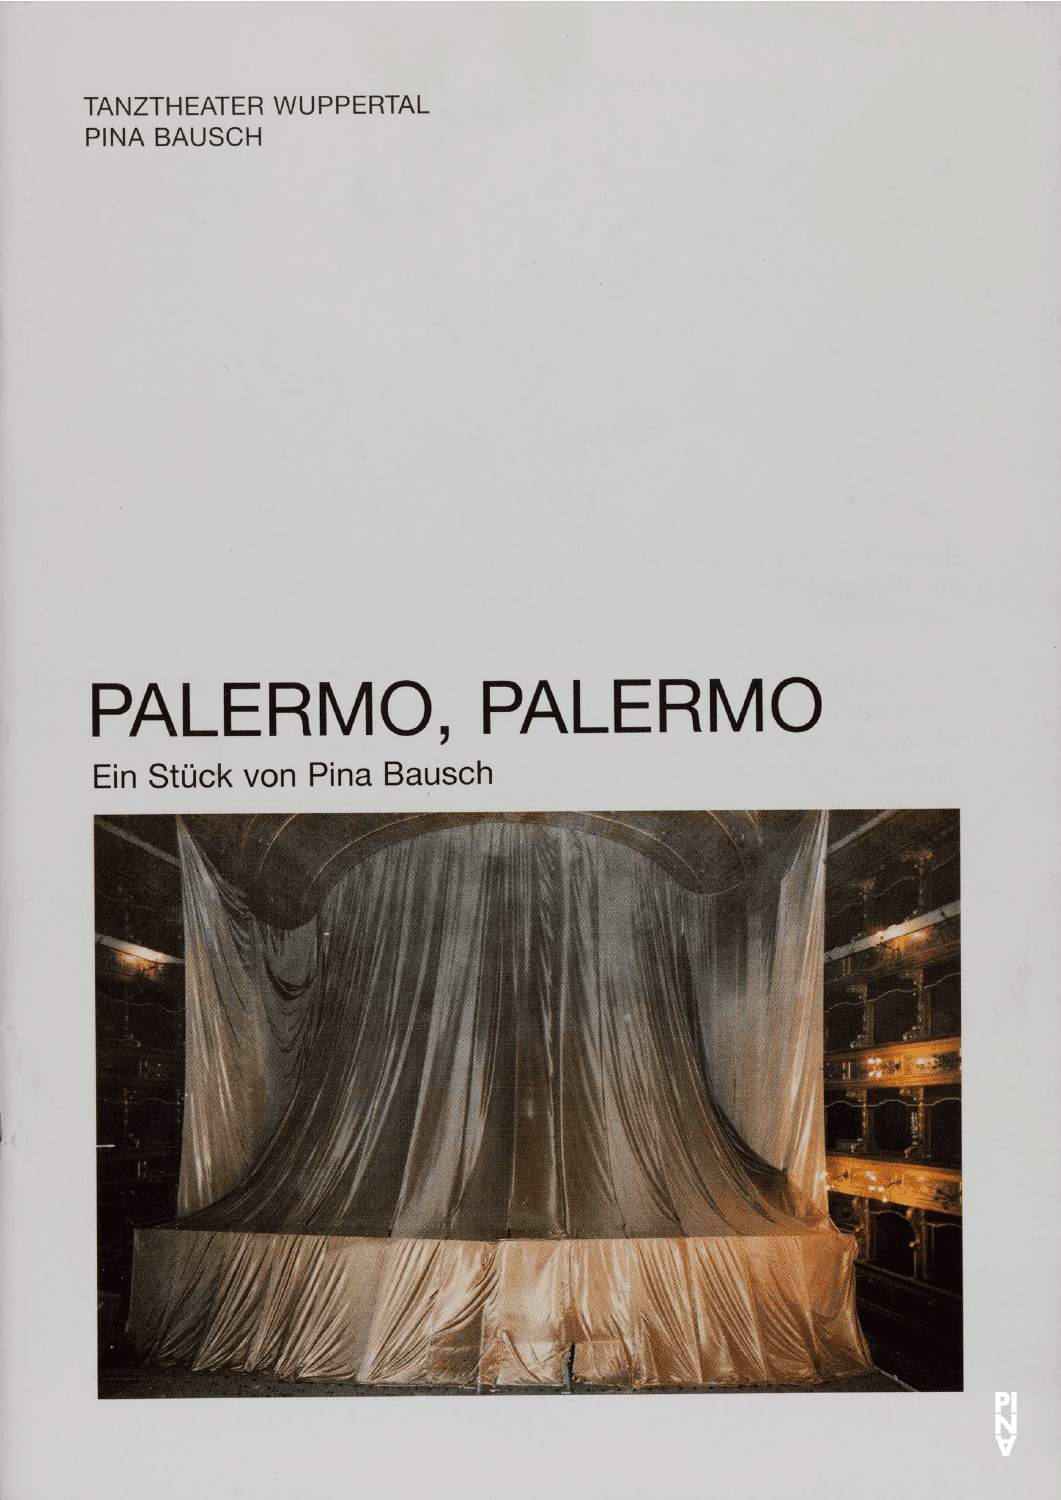 Booklet for “Palermo Palermo” by Pina Bausch with Tanztheater Wuppertal in in Wuppertal, 12/12/2002 – 12/14/2002